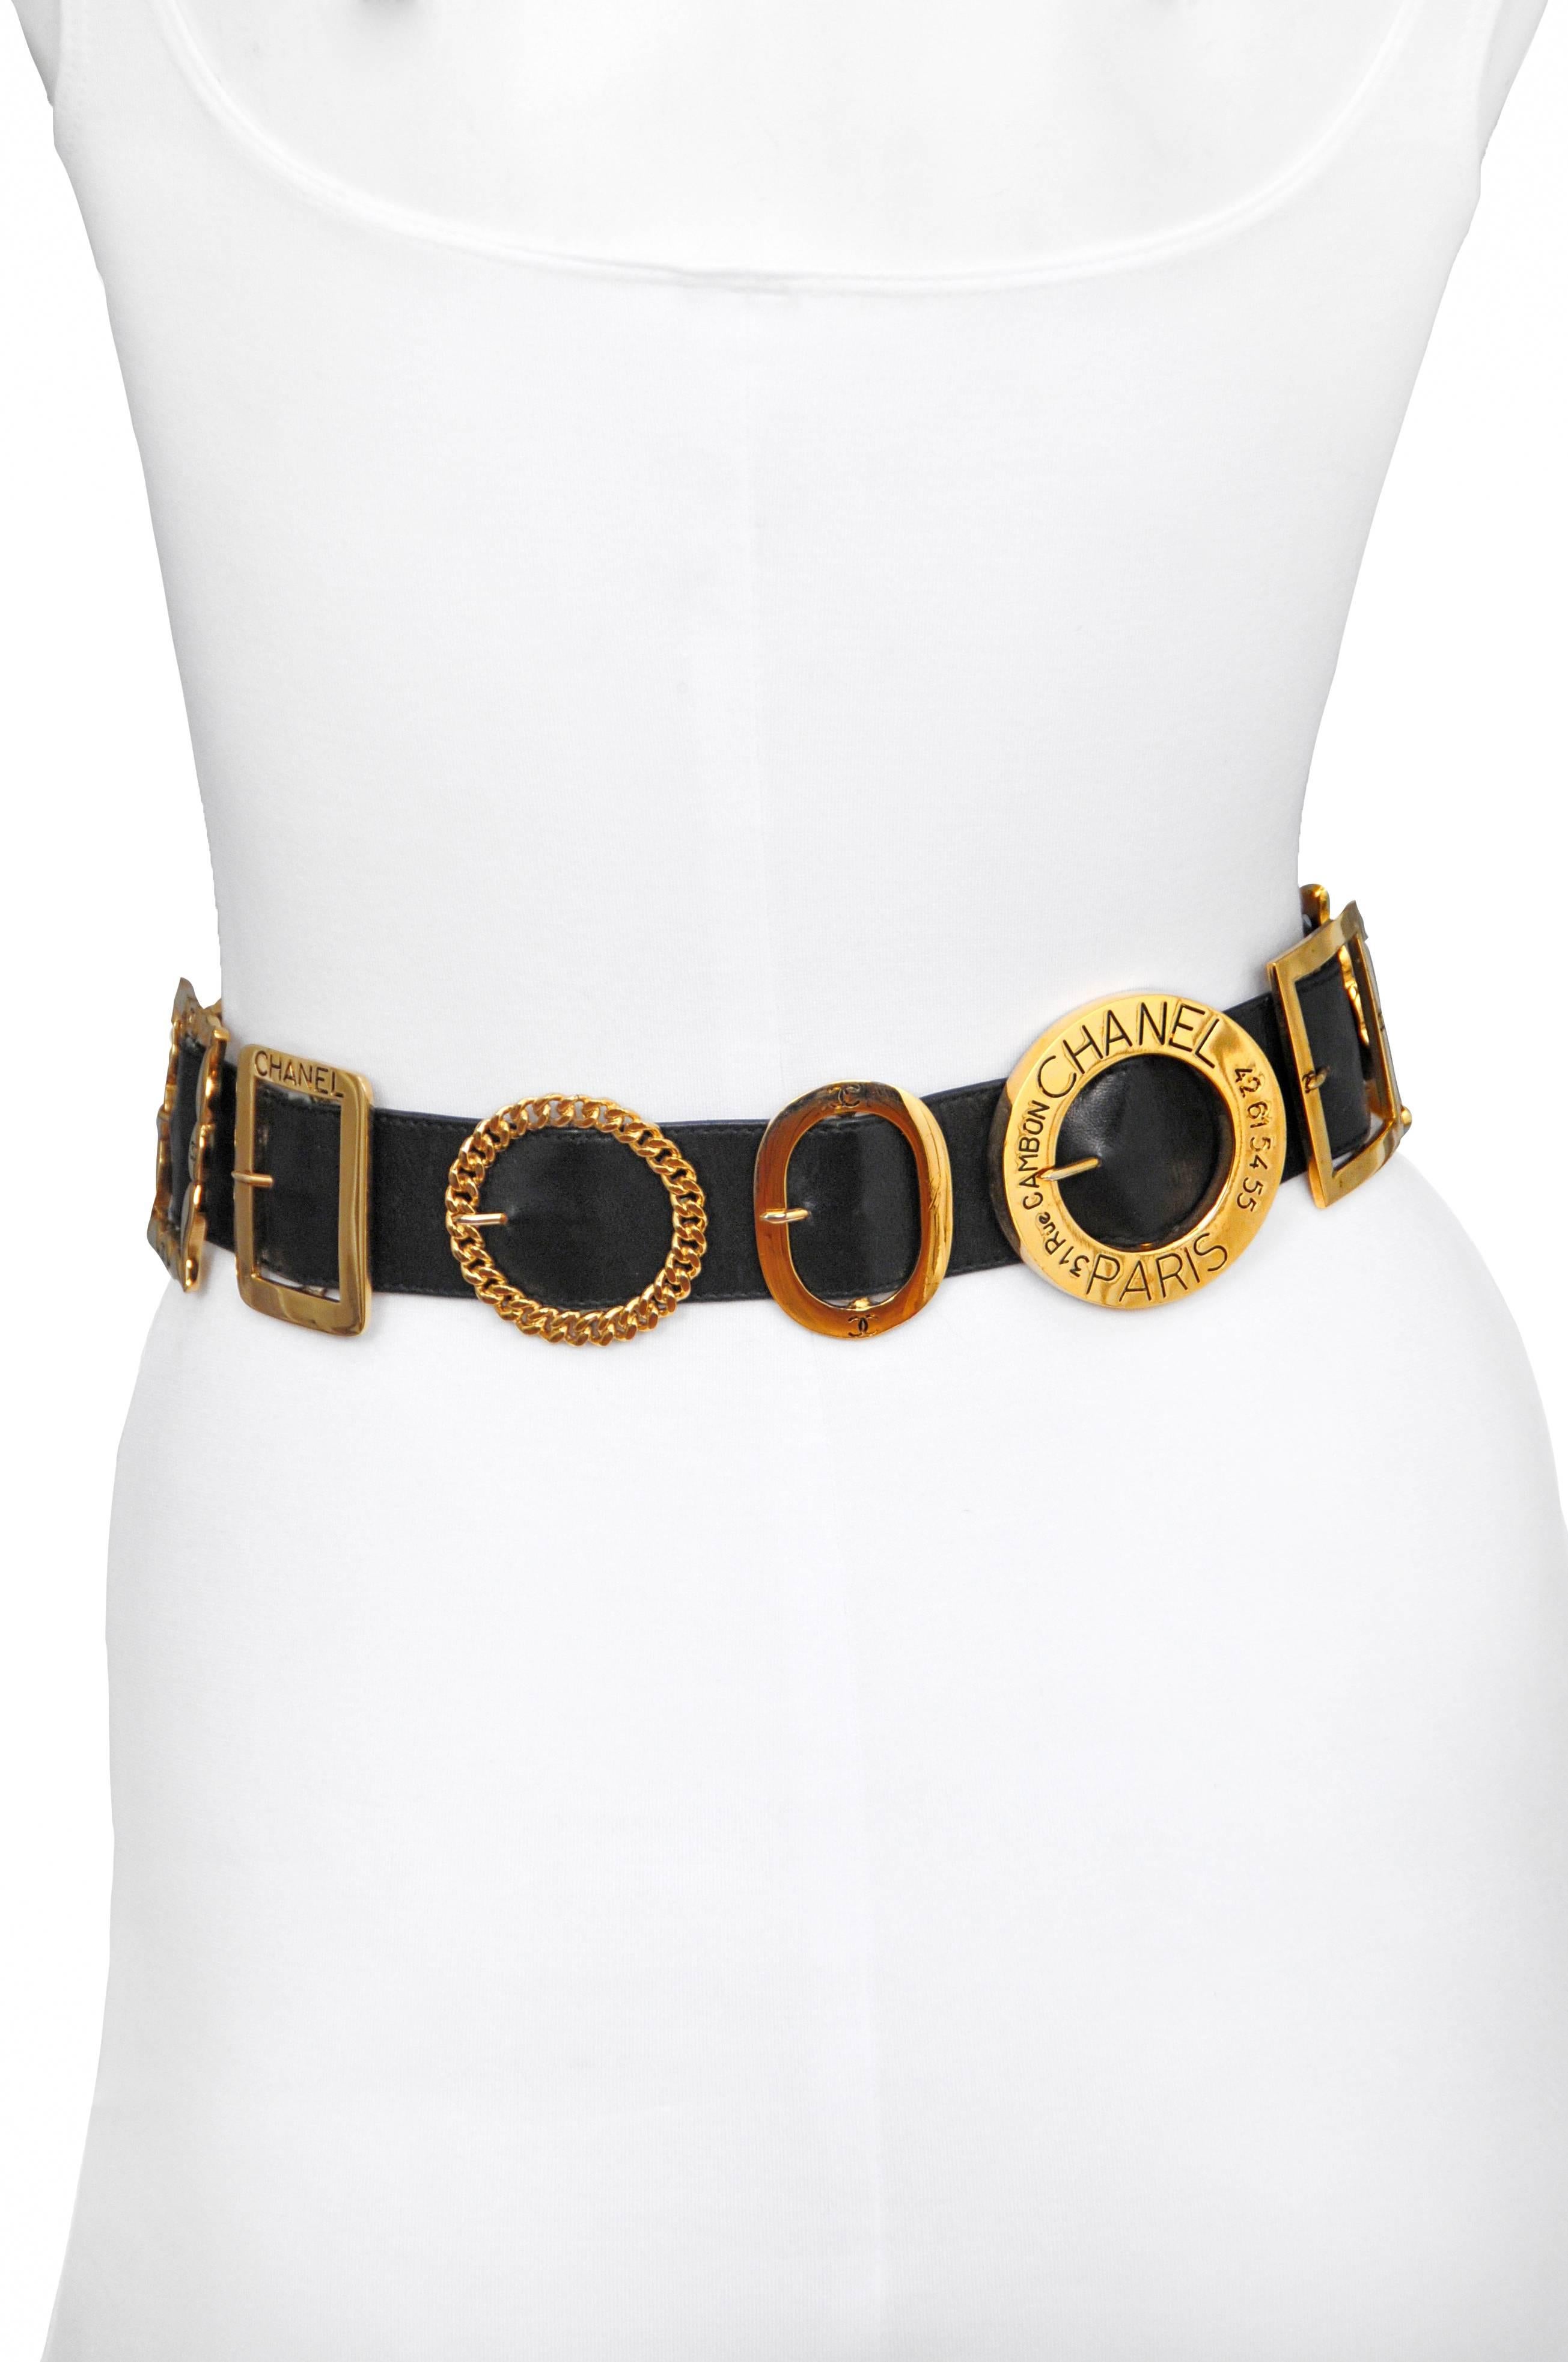 Vintage Chanel black leather belt featuring various styles of gold tone buckles throughout. 